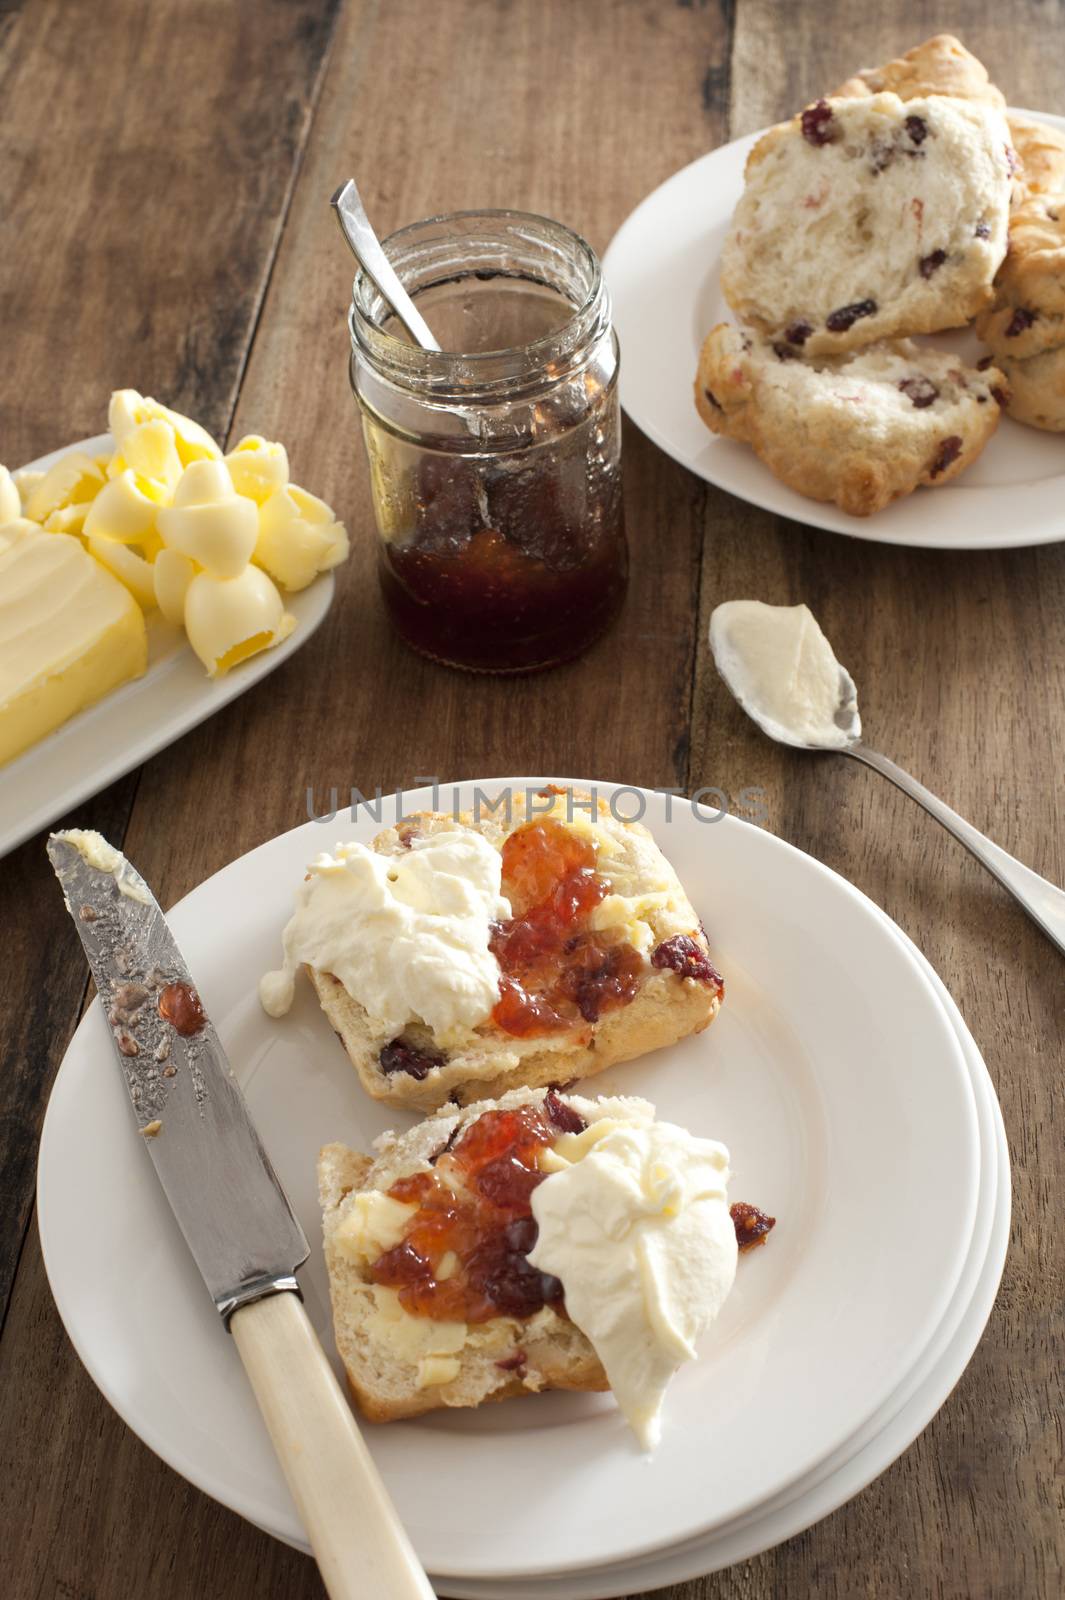 Fresh buttered rock cake with cream and fruit jam by stockarch